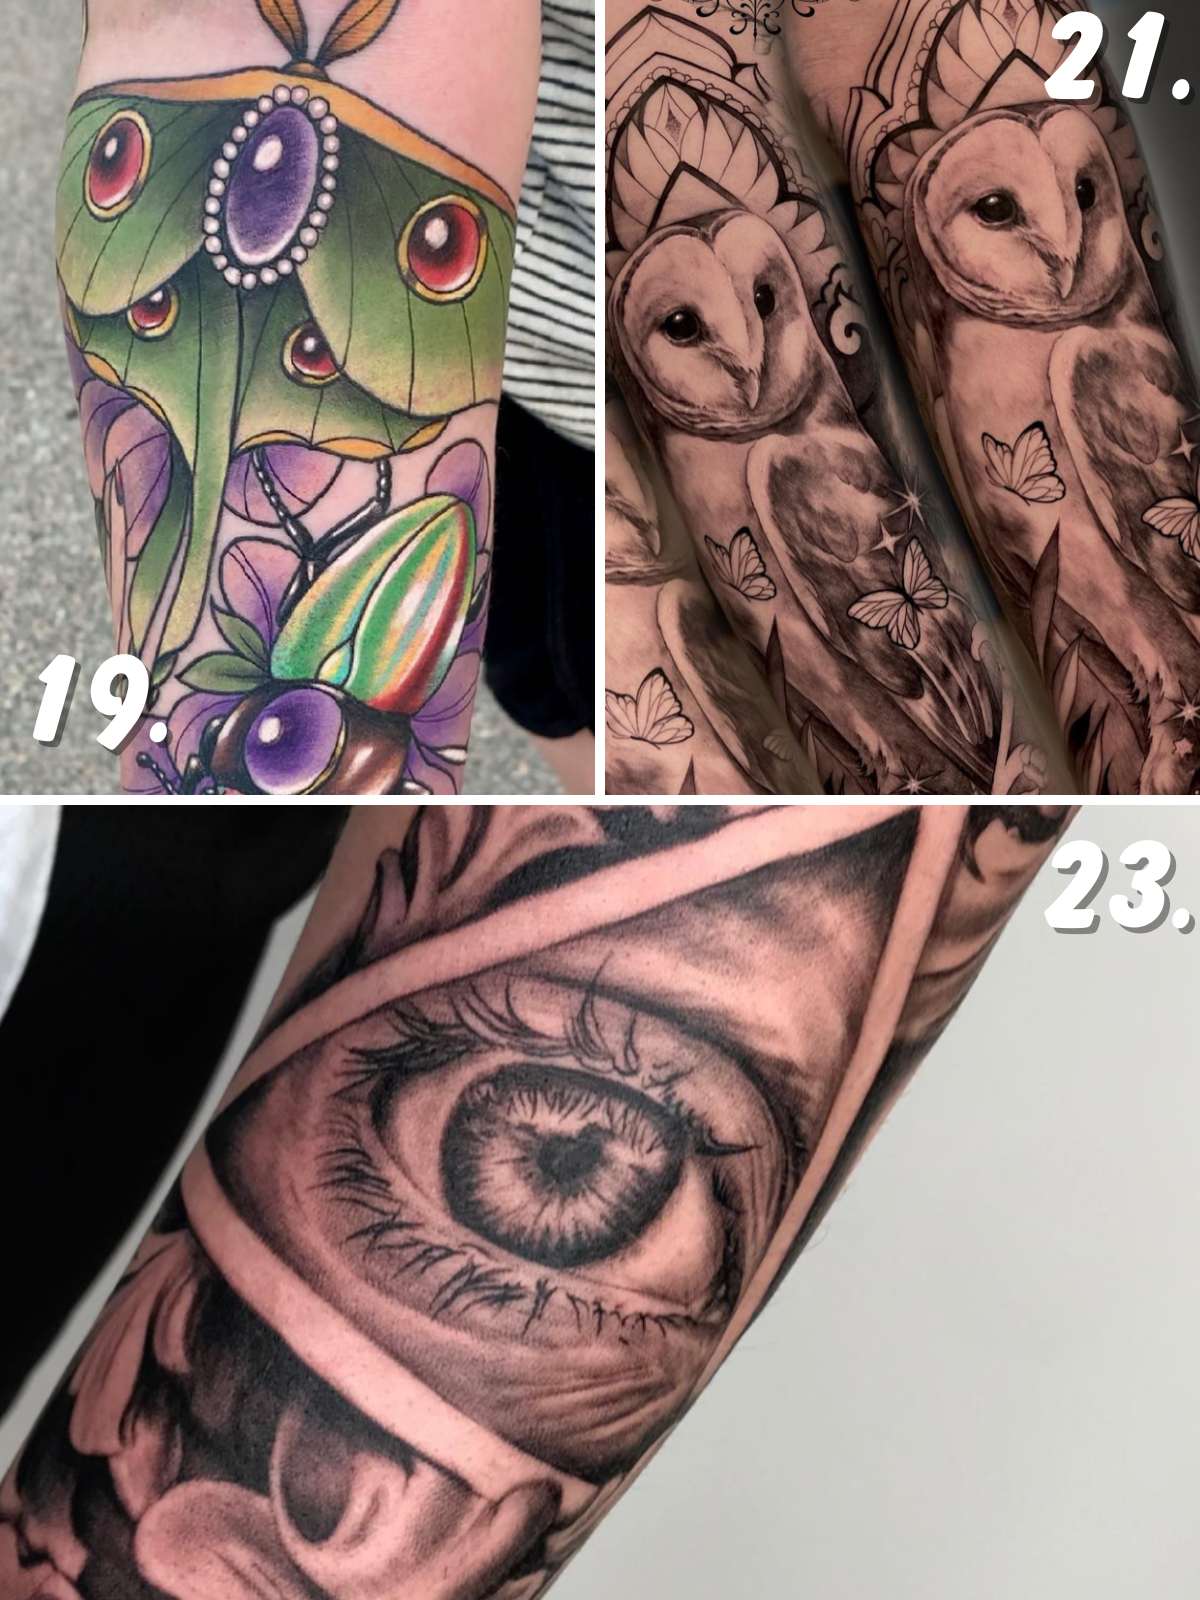 Three different tattoos. One with colorful moth. One with owls. And one with eye with triangle.